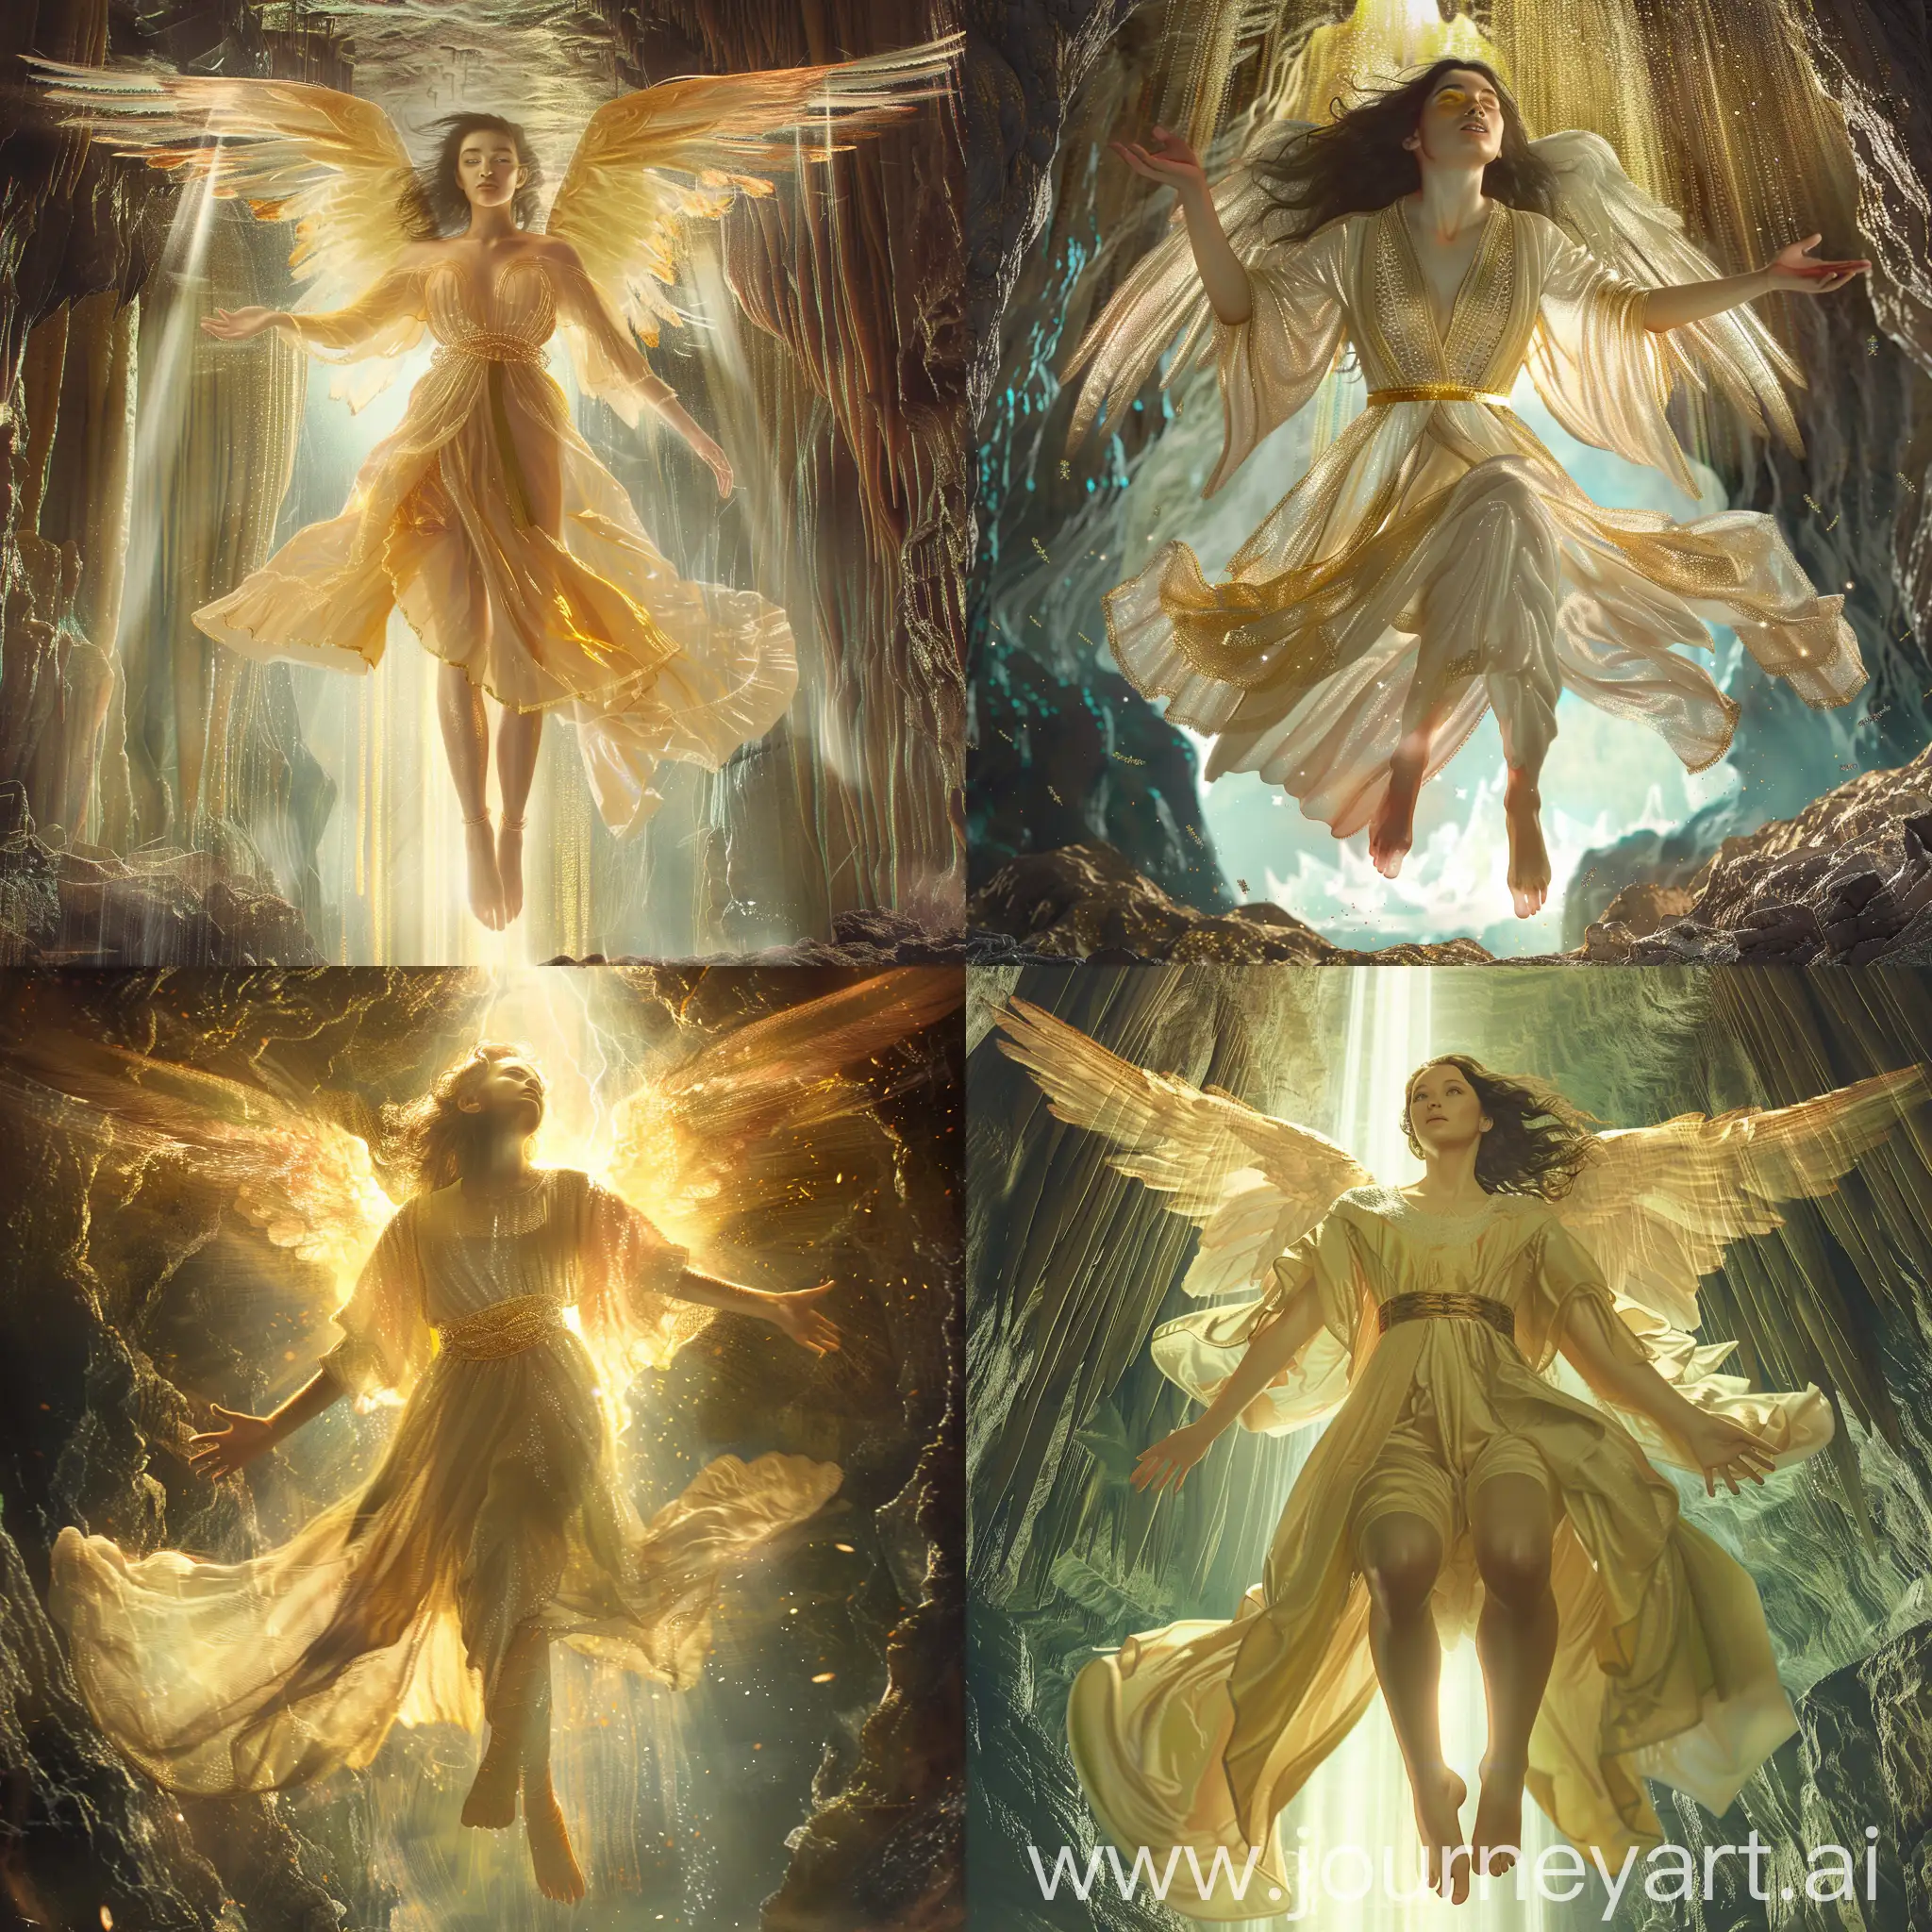 An angelic figure hovers majestically in a vast, ethereal inner earth realm, her whole body glowing with divine radiance. She has a beautifully mysterious face, long flowing robes like a celestial dress, with a golden belt cinched at the waist. Her legs, feet, hands and fingers appear perfectly formed. This is a highly detailed, photorealistic depiction in the style of digital art masterpieces. An otherworldly, sacred atmosphere pervades the subterranean space around the hovering guardian angel.